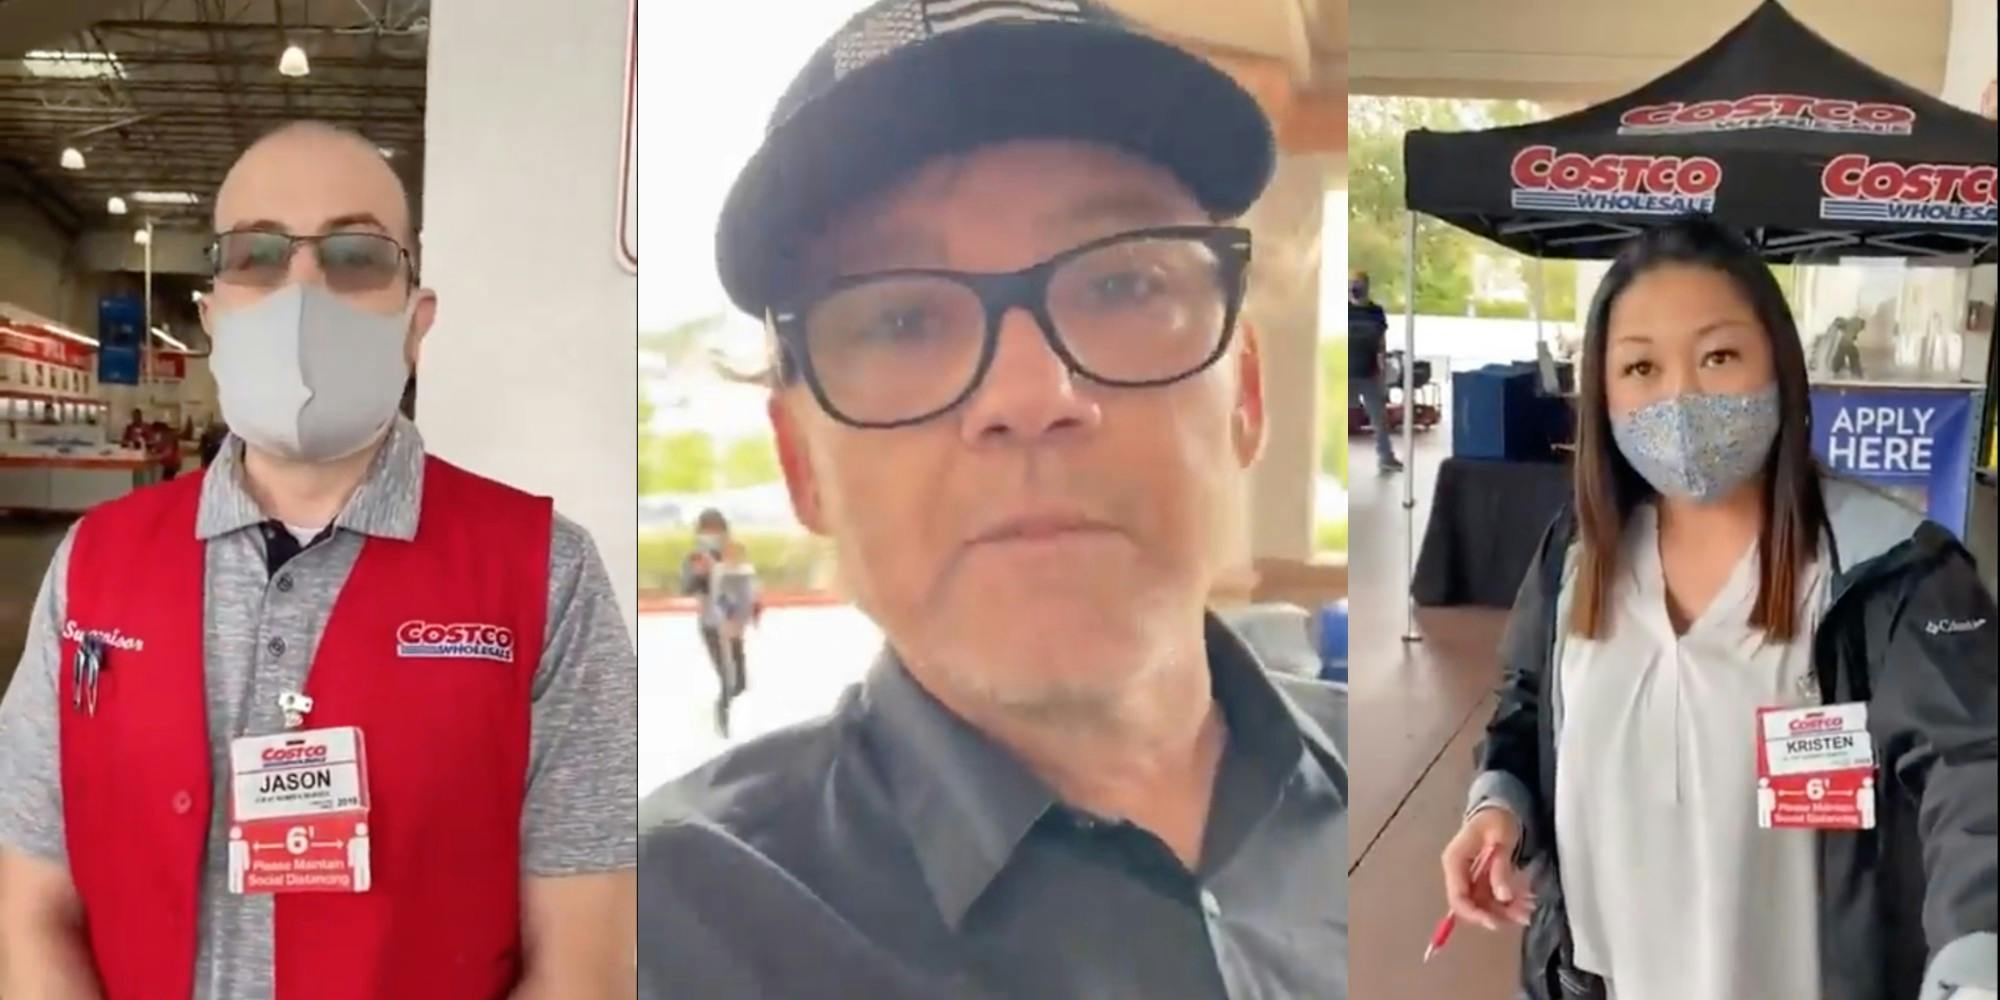 Ex Child Star Ricky Schroder Harasses Costco Employee In Video